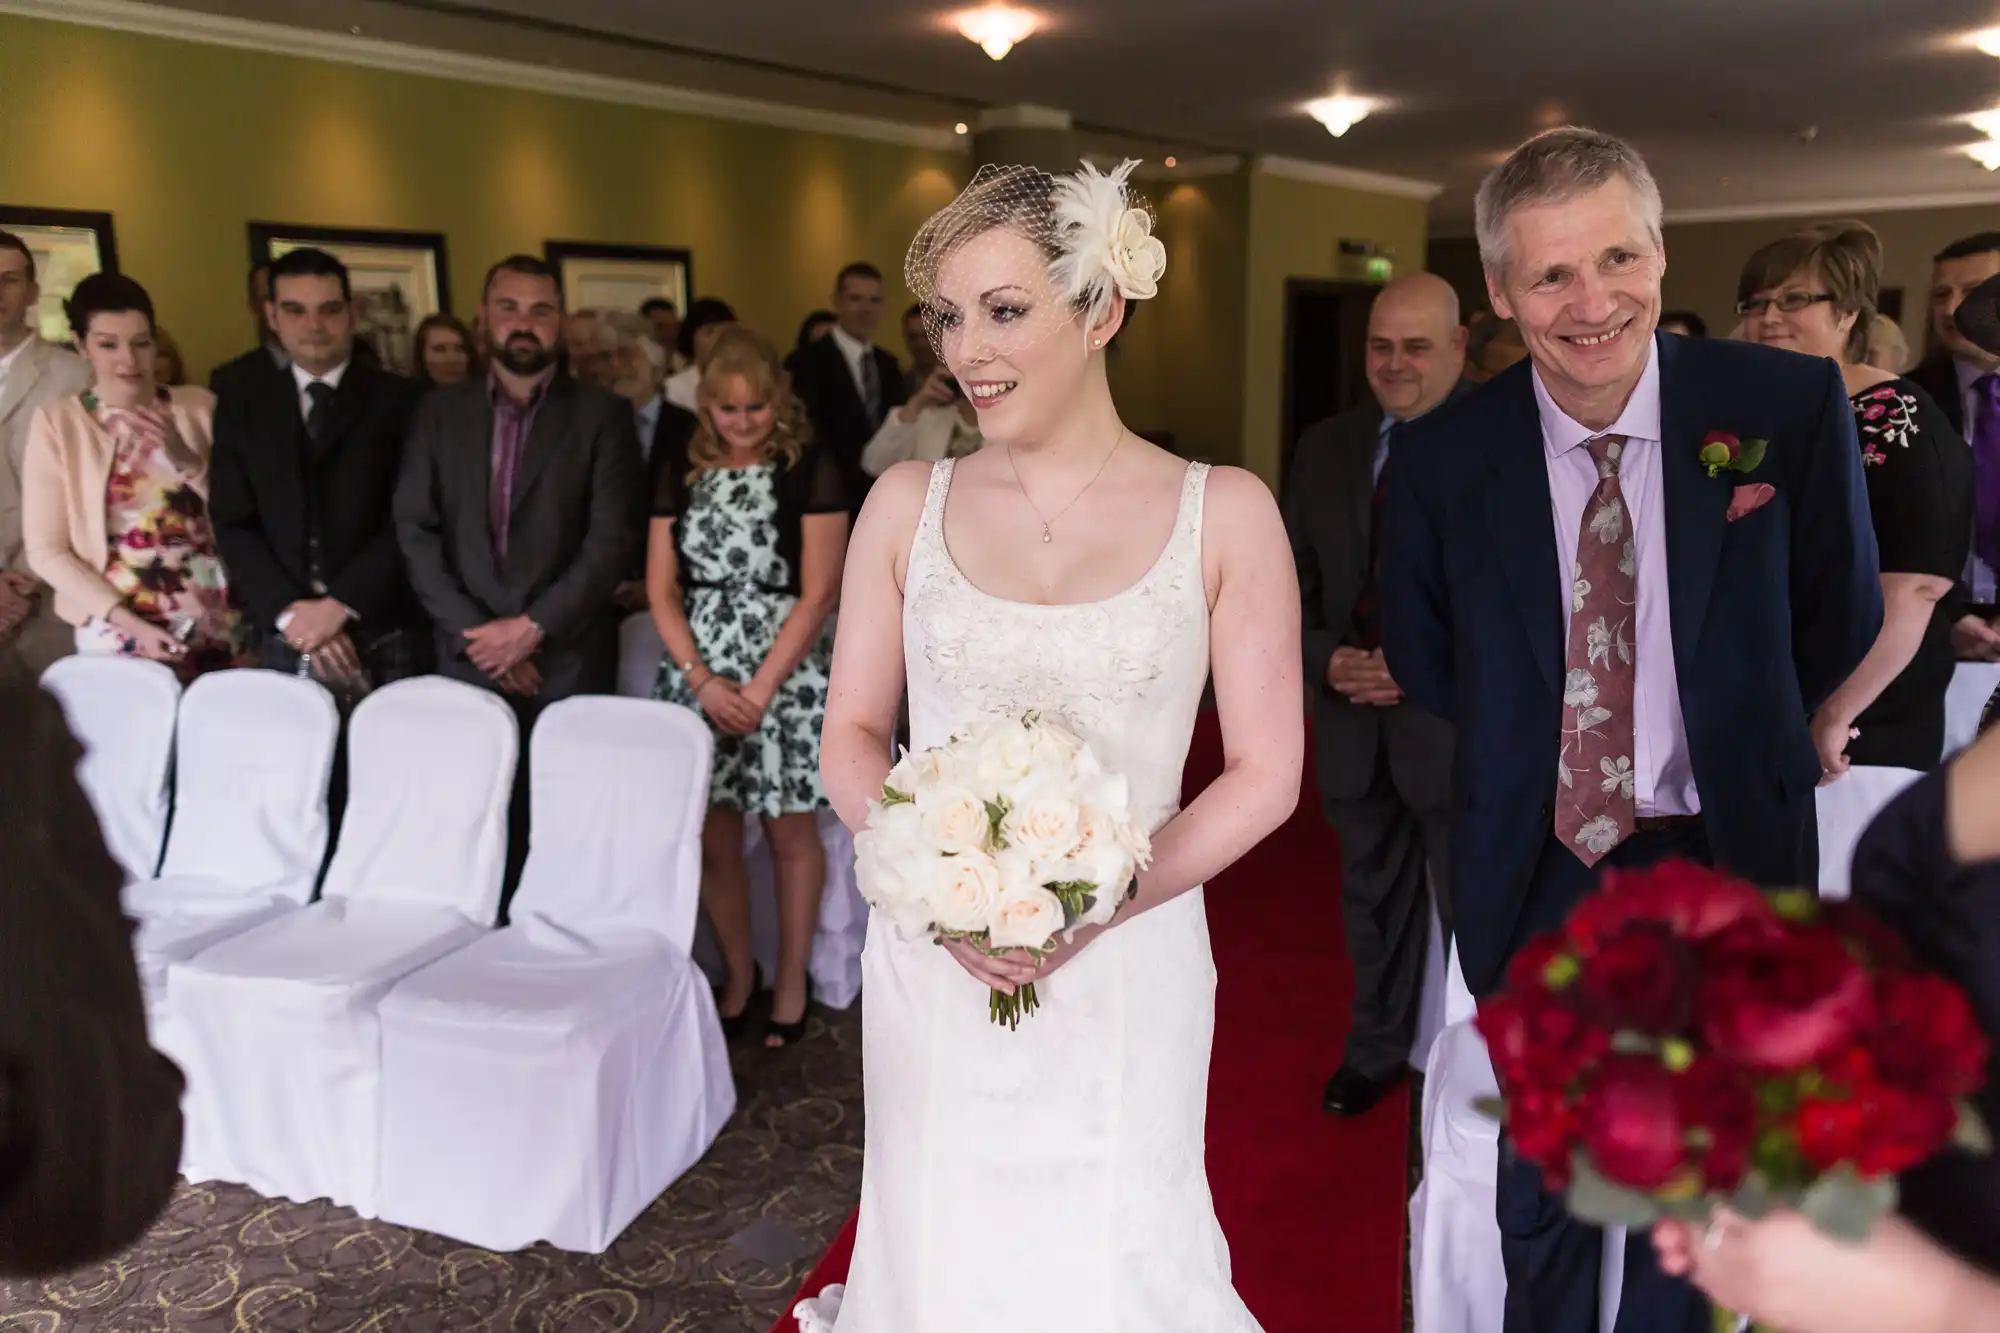 A bride in a white dress with a bouquet walks down the aisle, smiling, accompanied by an older man in a suit, with guests watching.